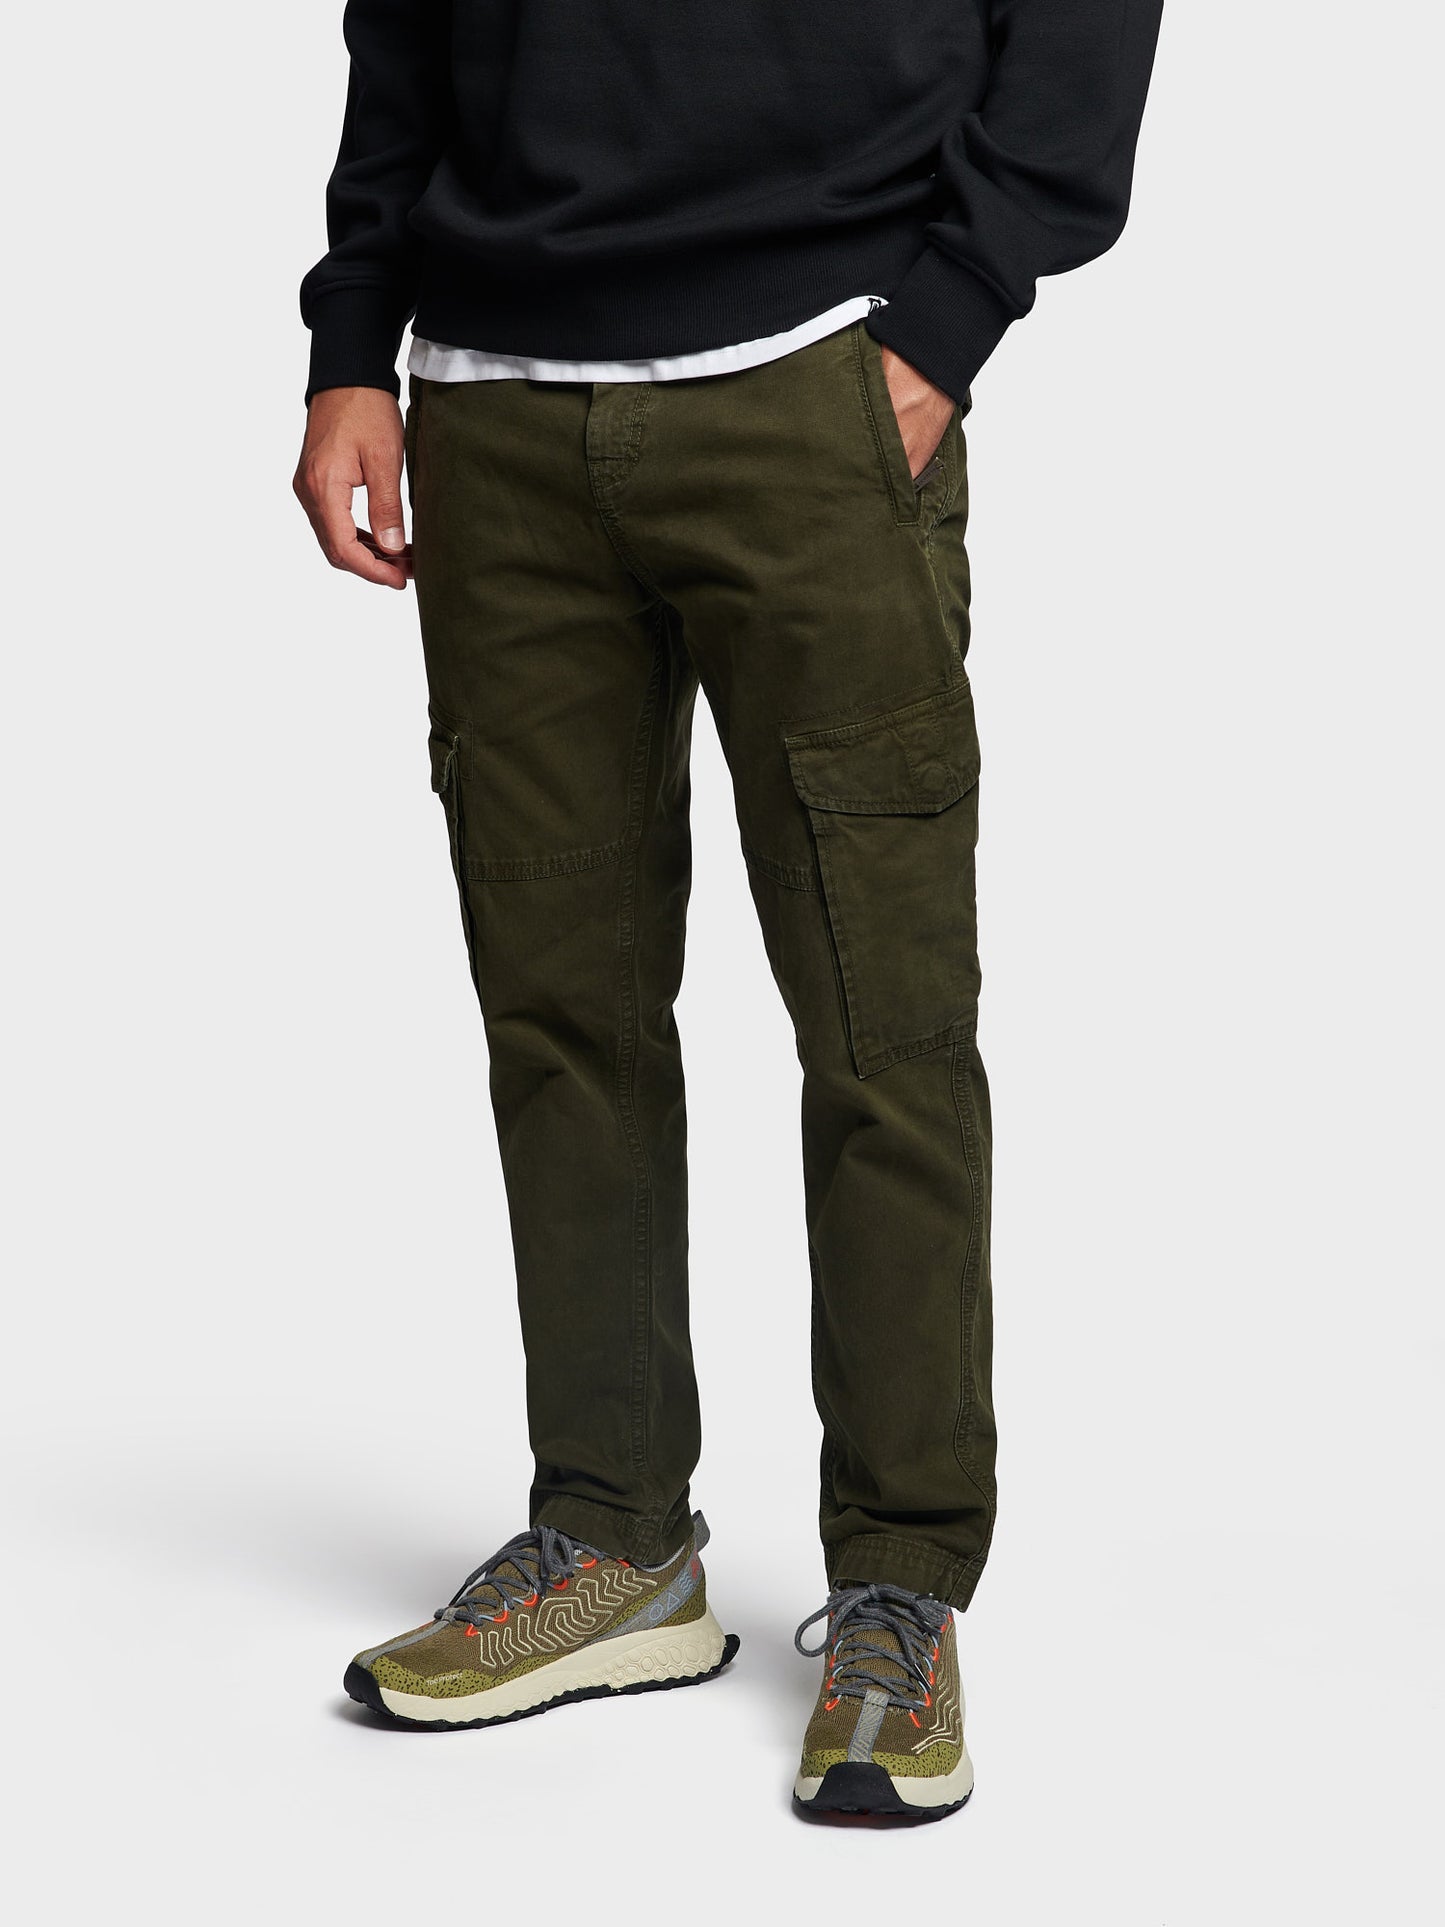 Bear Cargo Pants in Forest Night